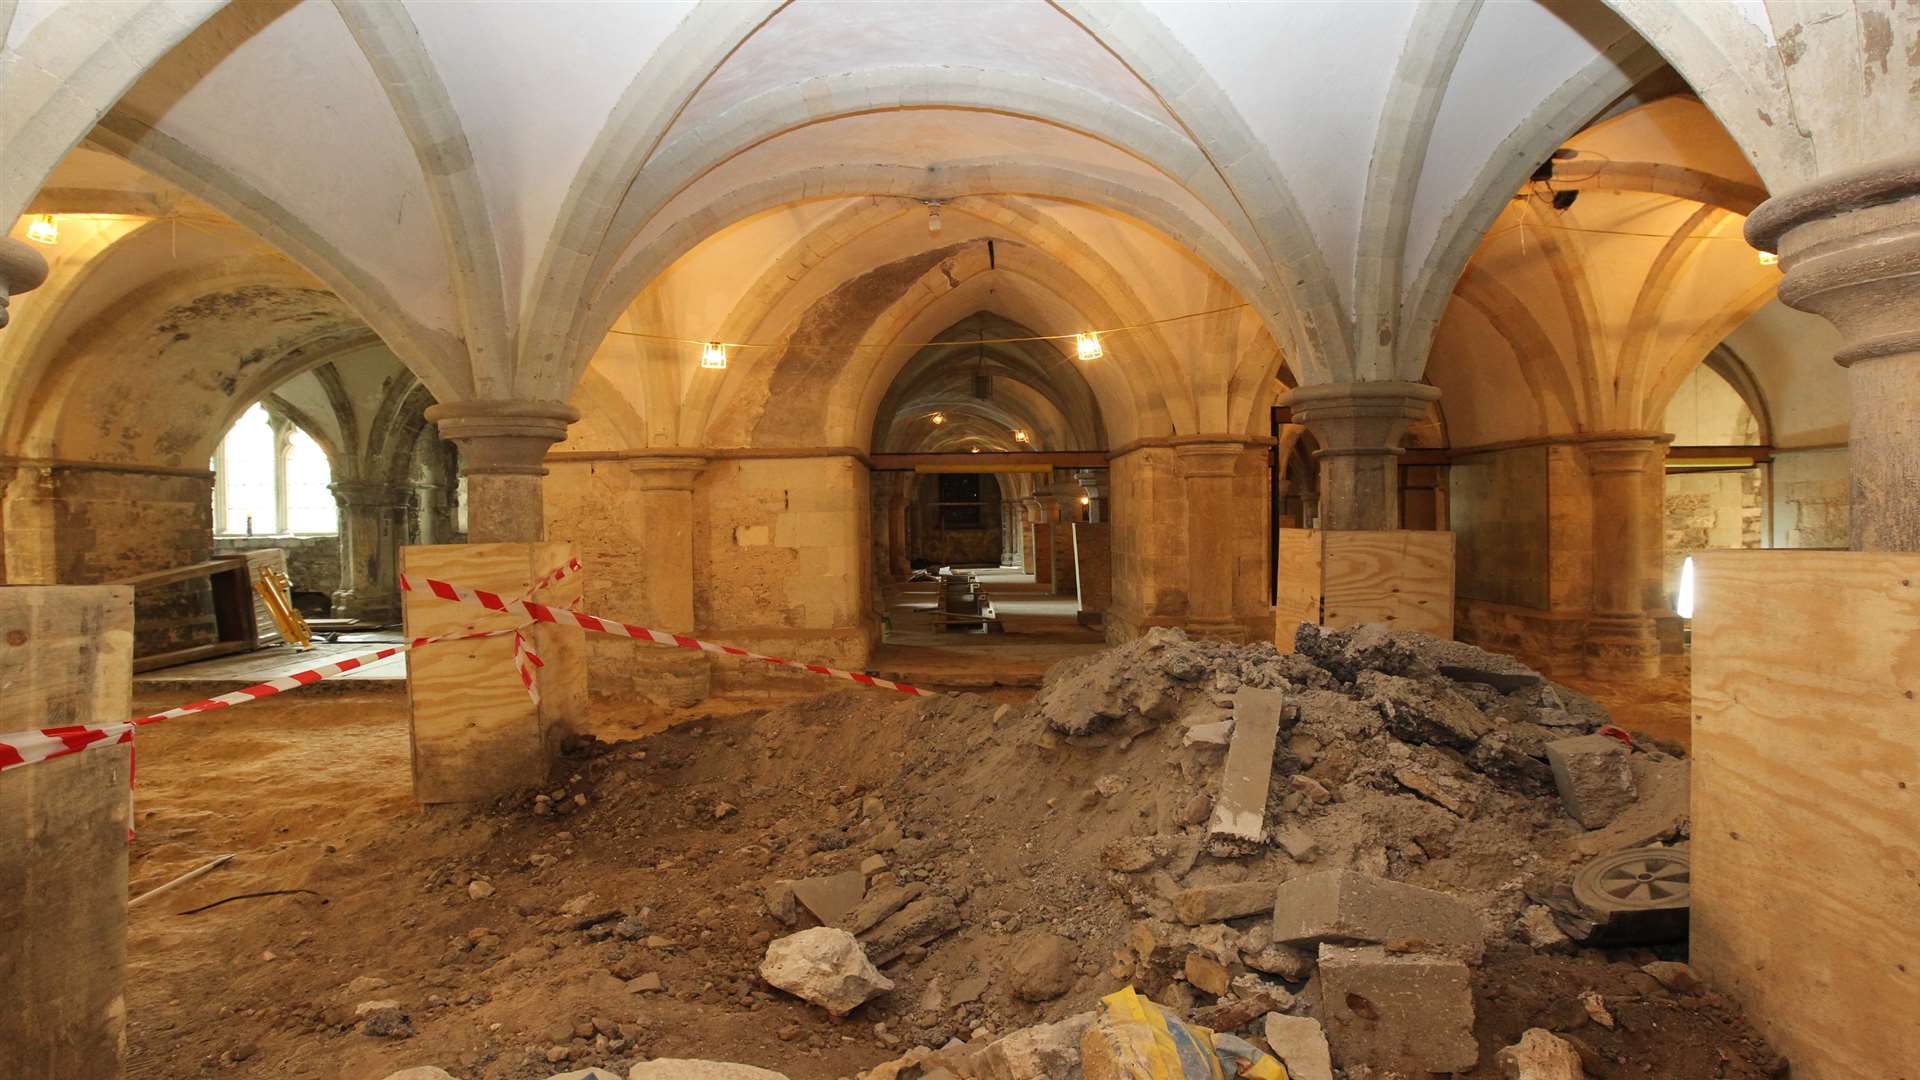 The crypt during excavation work last year